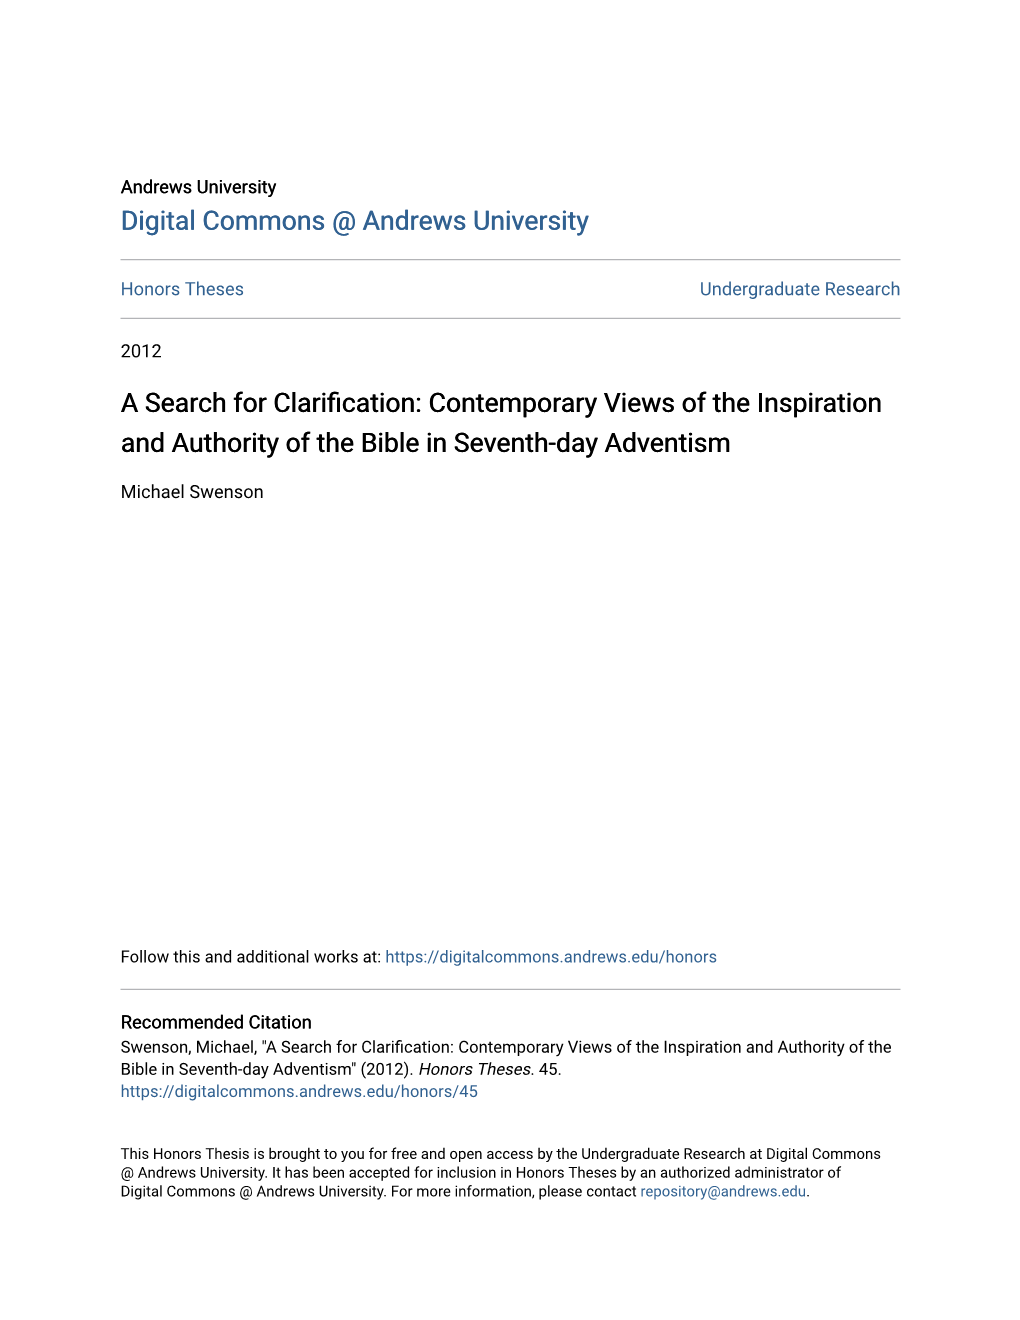 Contemporary Views of the Inspiration and Authority of the Bible in Seventh-Day Adventism